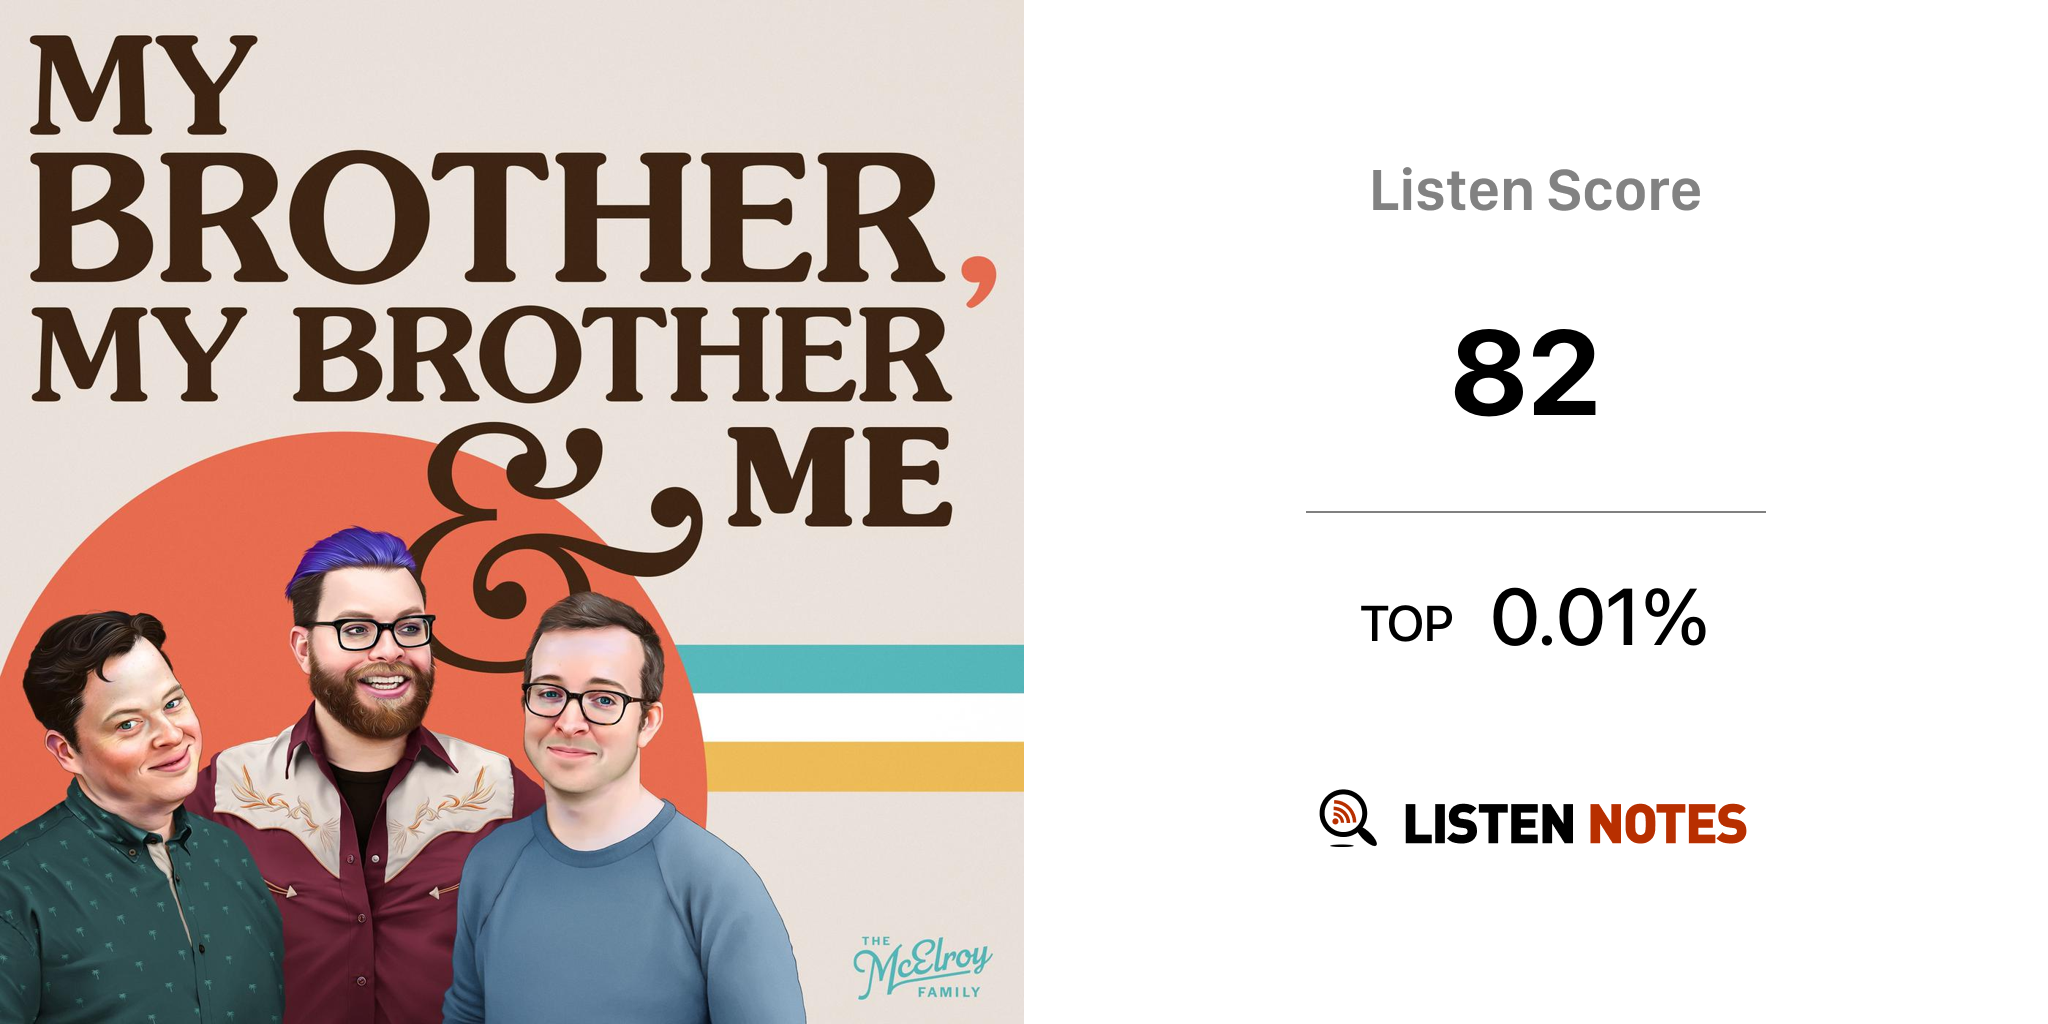 Listen to Another Brother podcast